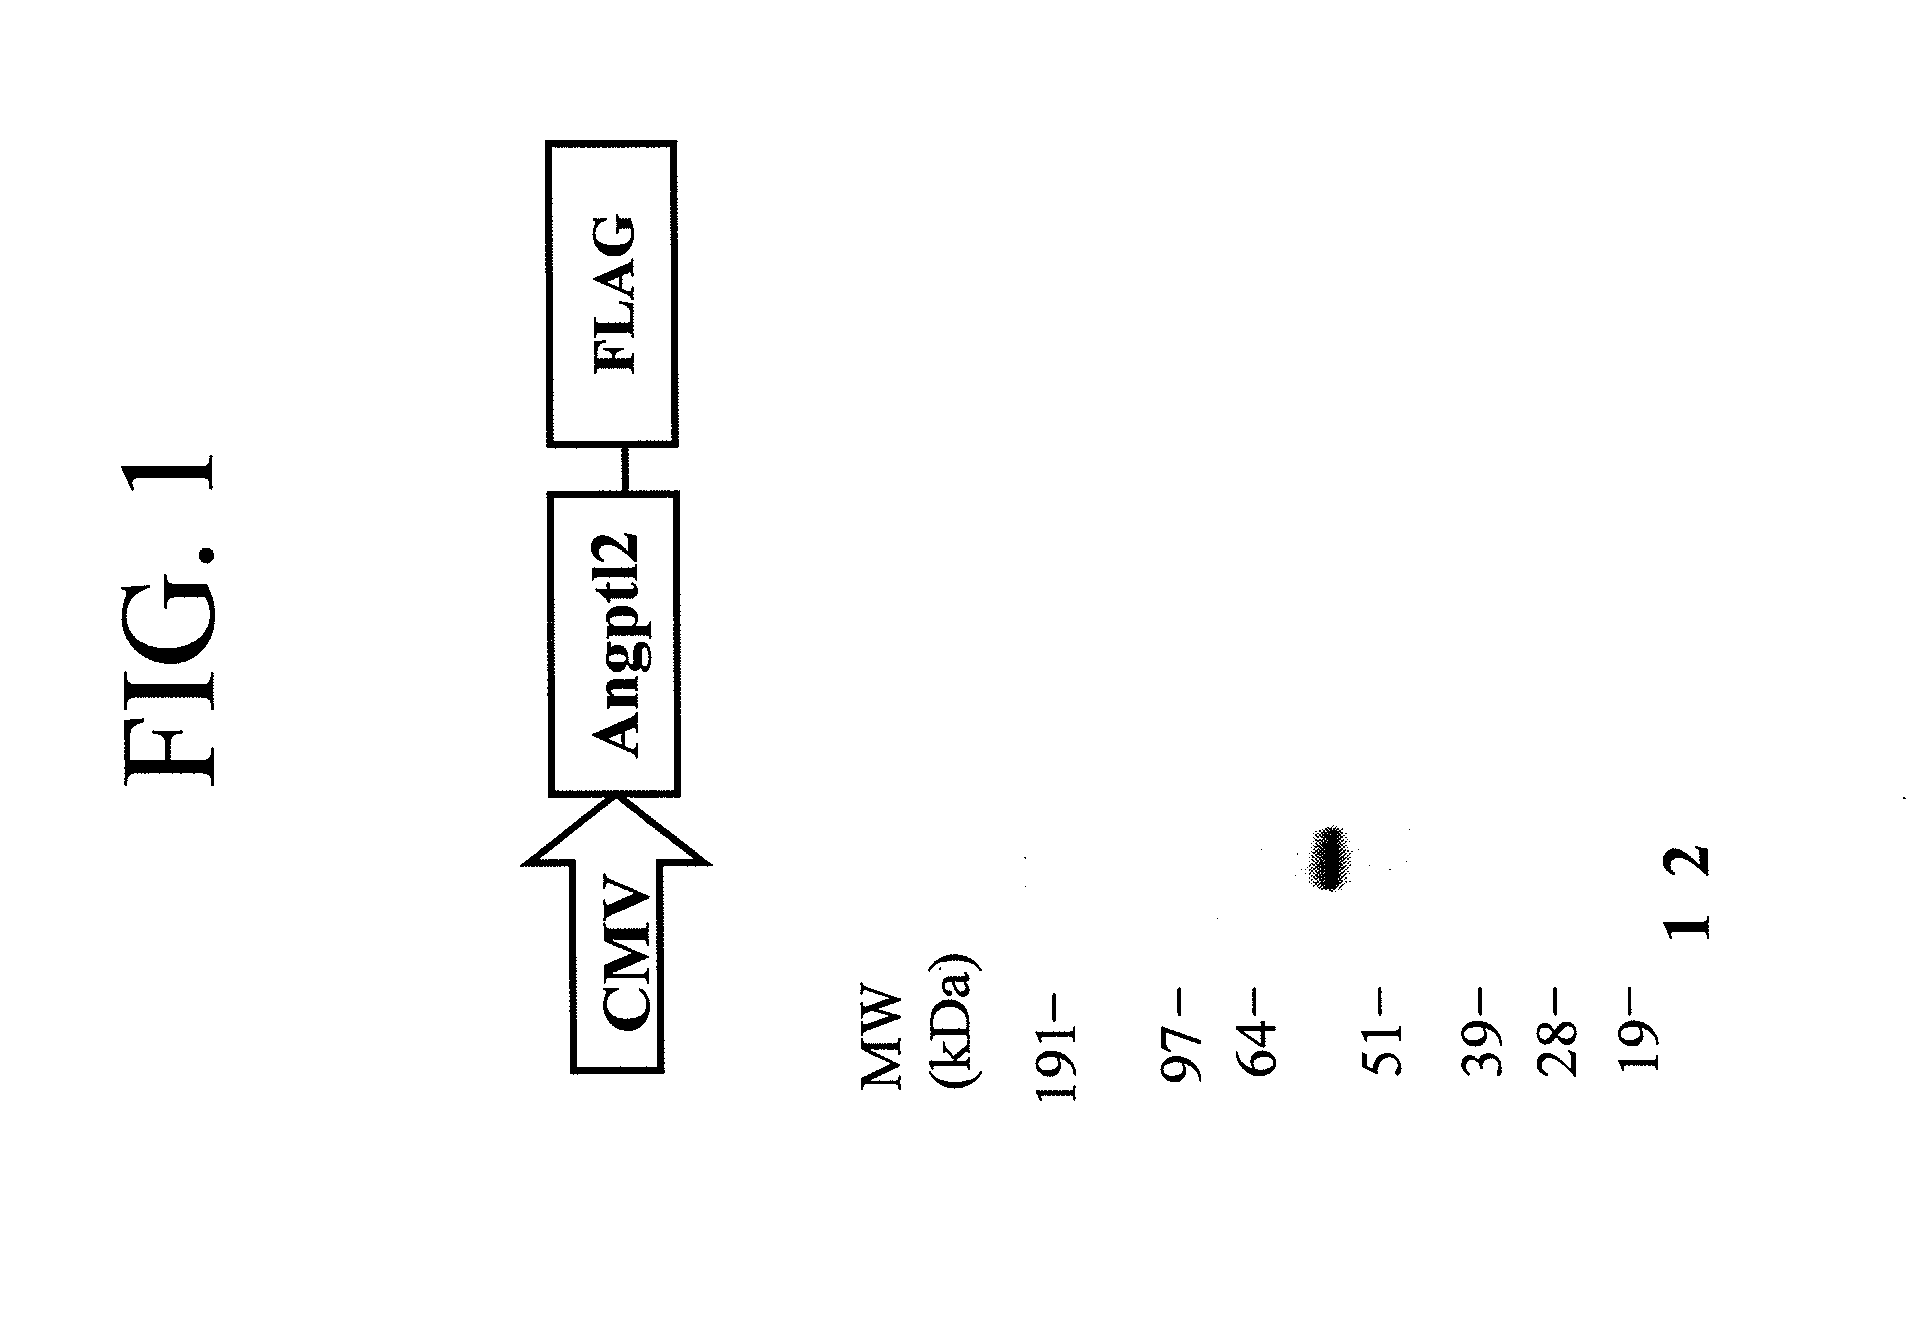 Methods for Expansion and Analysis of Cultured Hematopoietic Stem Cells